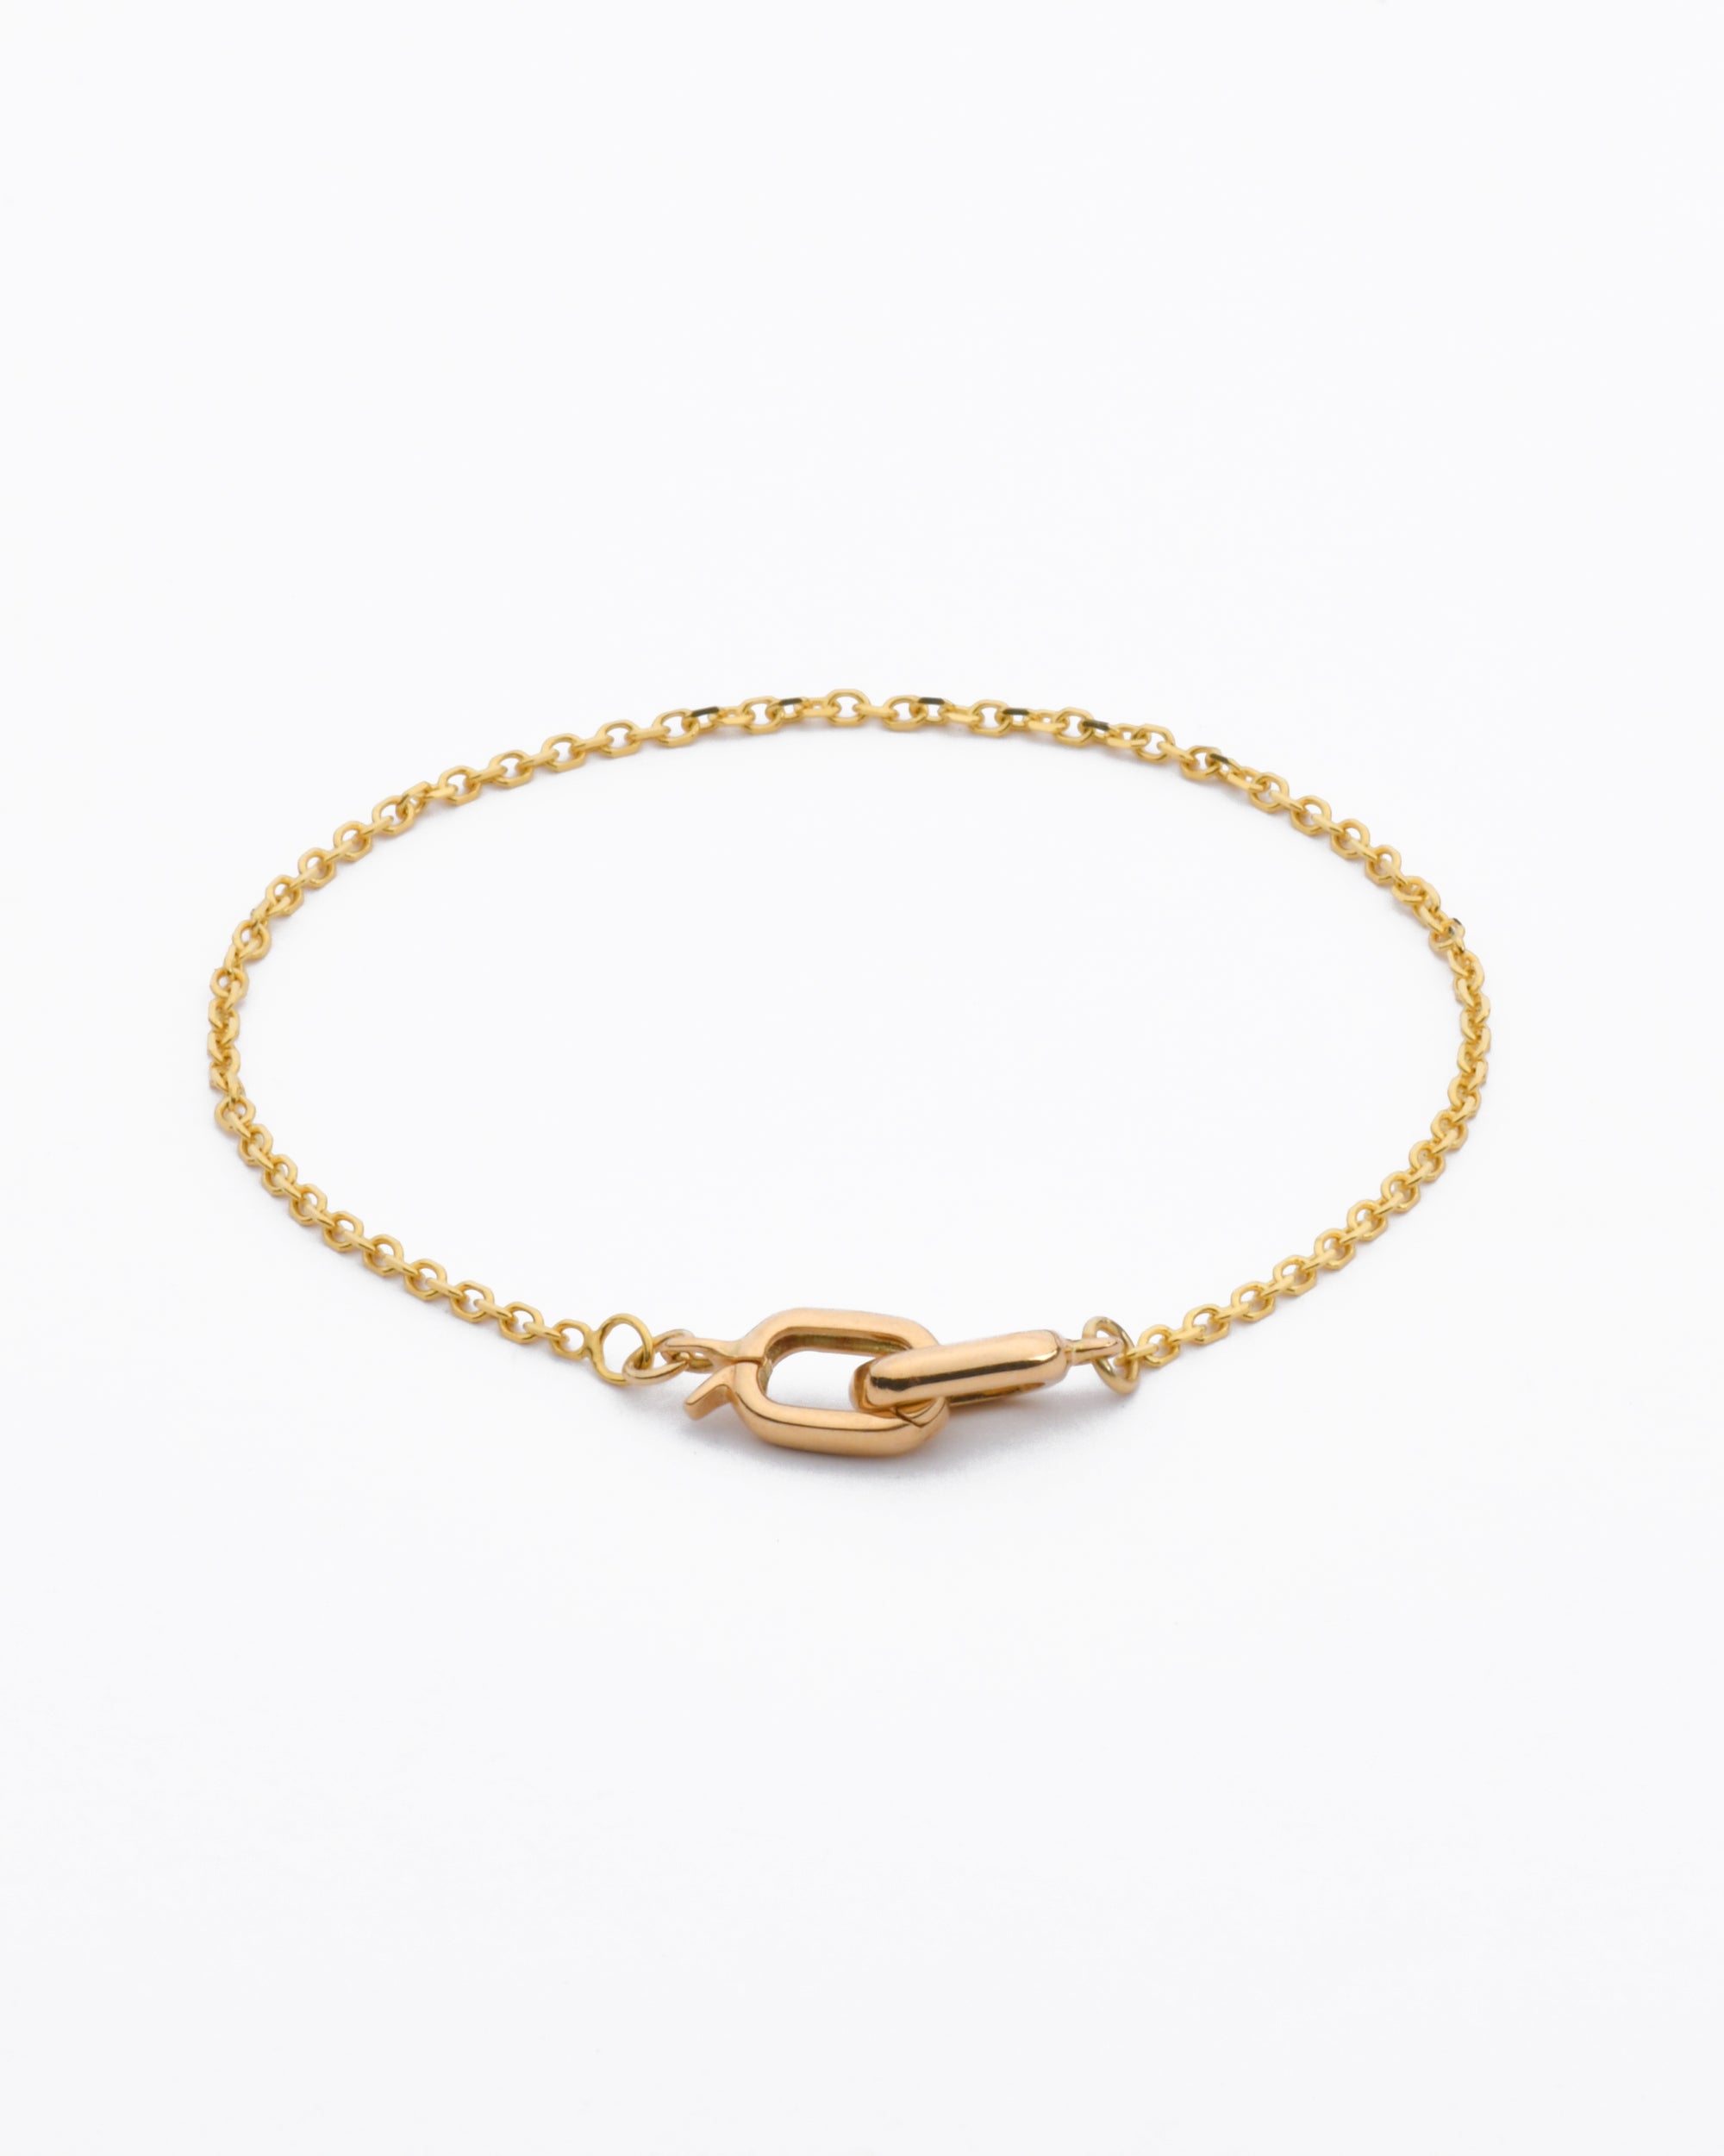 elegant 14 karat gold bracelet featuring a bevel cut cable chain and interlocking double oval clasp